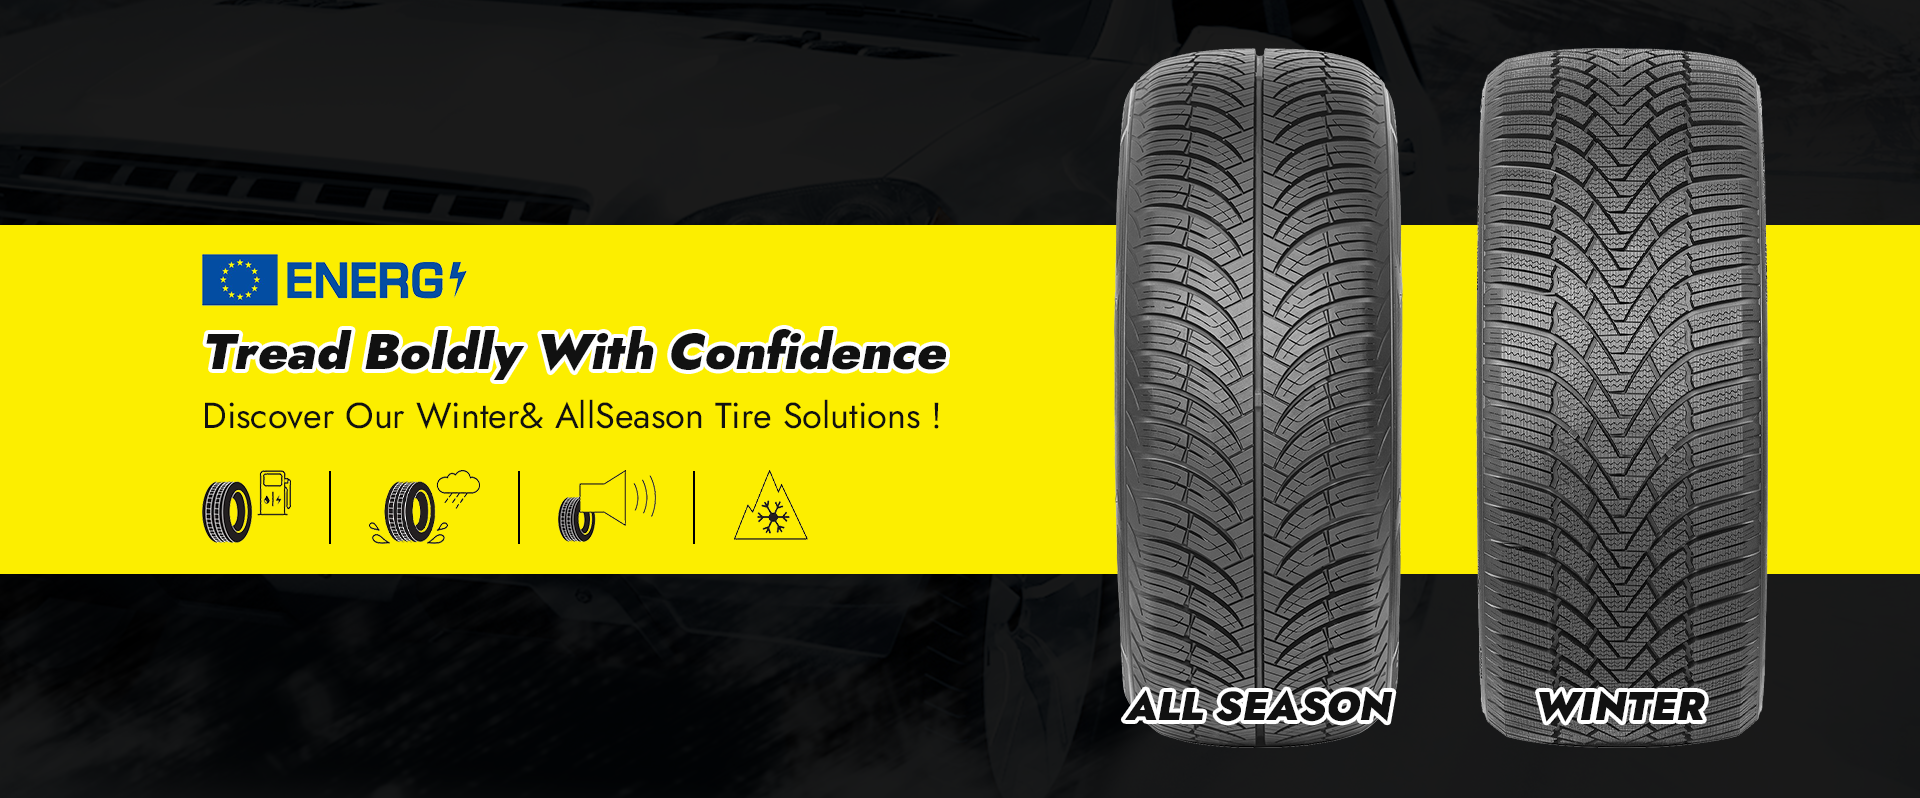 winter tire, snow tire, all season tires, China tire factory,China tire supplier.